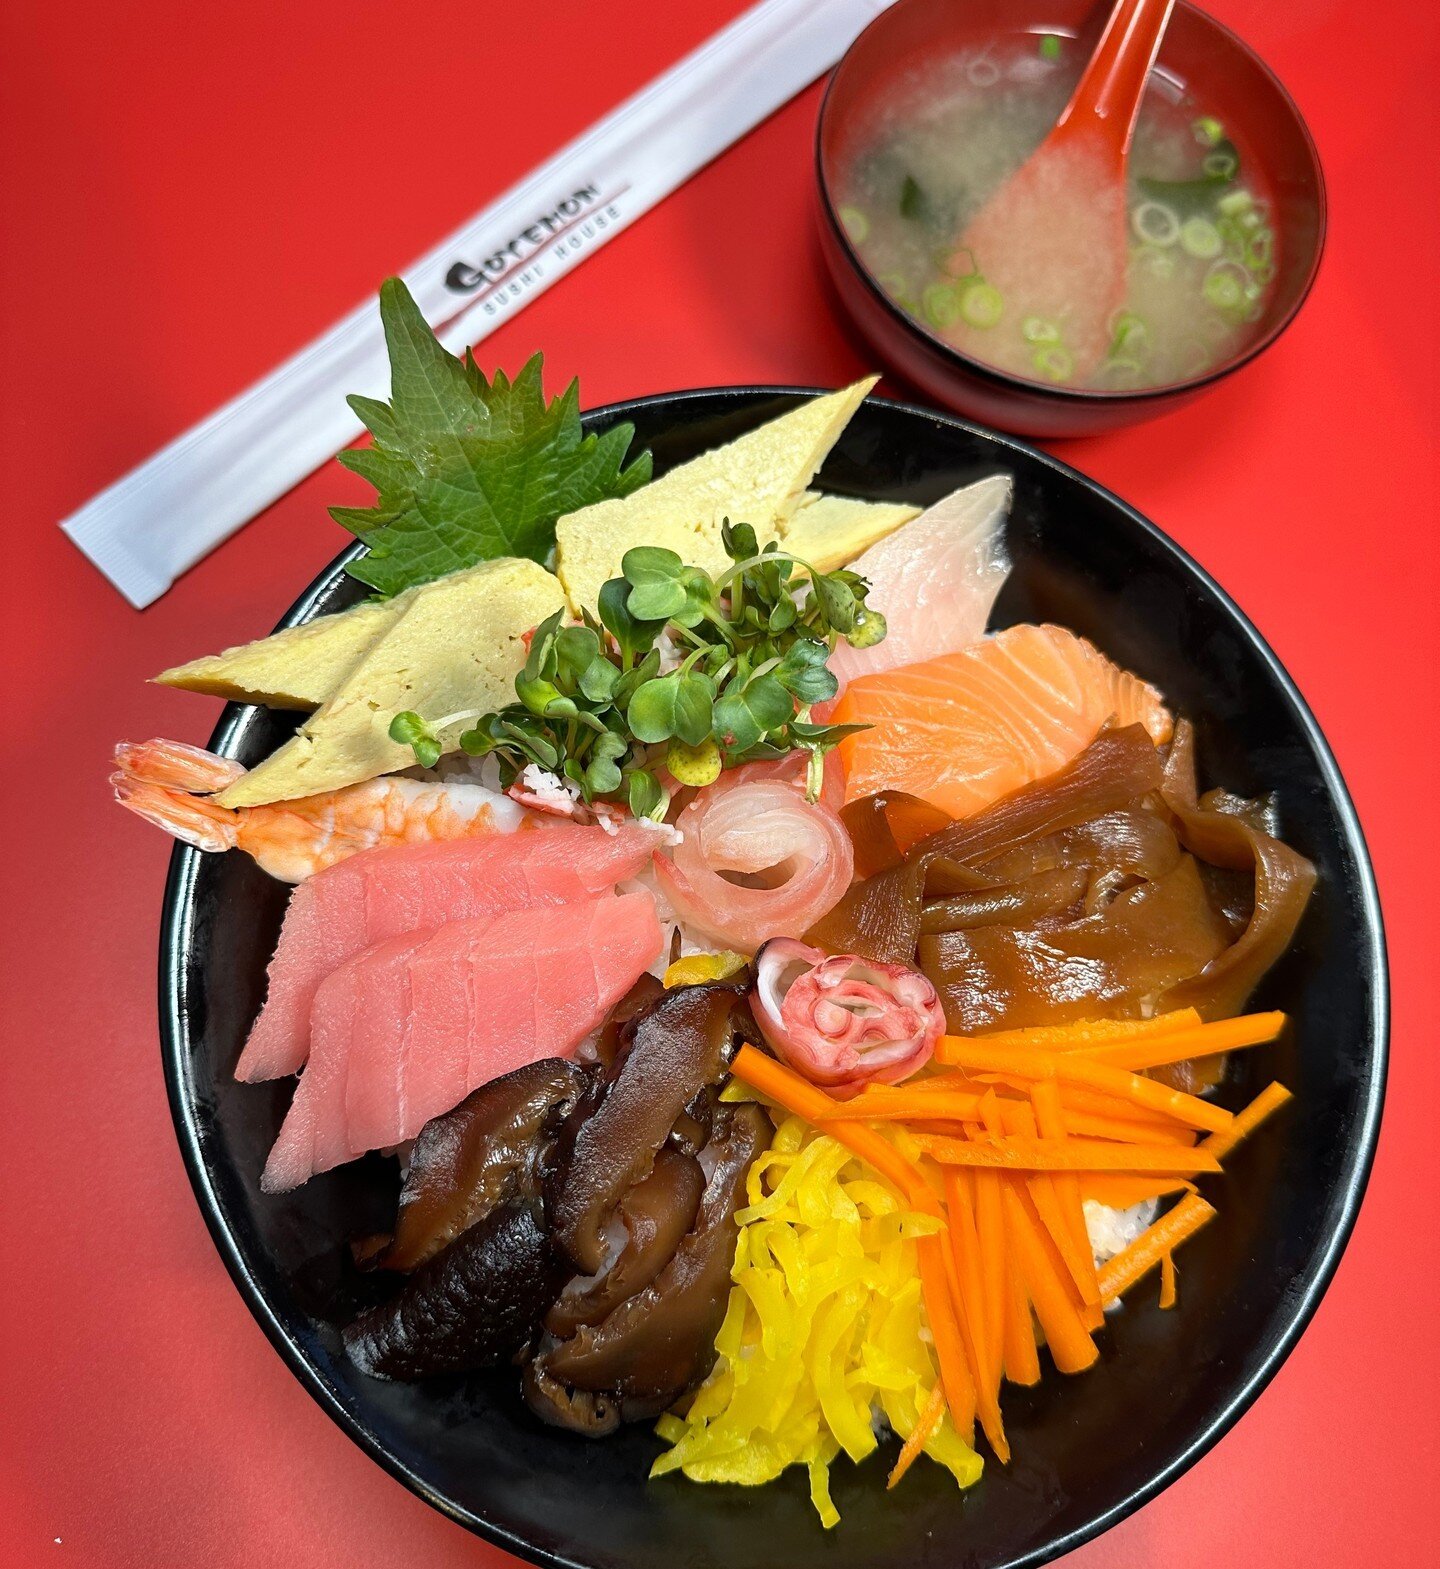 Brighten up  your day with a delicious bowl of Japanese culinary delight, where every bite is a flavorful celebration! ITADAKIMASU! #UmamiJourney 😋🙌🏻 

◾️◽️◾️◽️◾️◽️◾️◽️◾️◽️ 
🍣 𝗔𝗬𝗖𝗘 𝗦𝗨𝗦𝗛𝗜 𝗛𝗢𝗨𝗦𝗘 𝗚𝗢𝗬𝗘𝗠𝗢𝗡 
⏰ ᴅᴀɪʟʏ: 12:00 ᴘᴍ - 11: